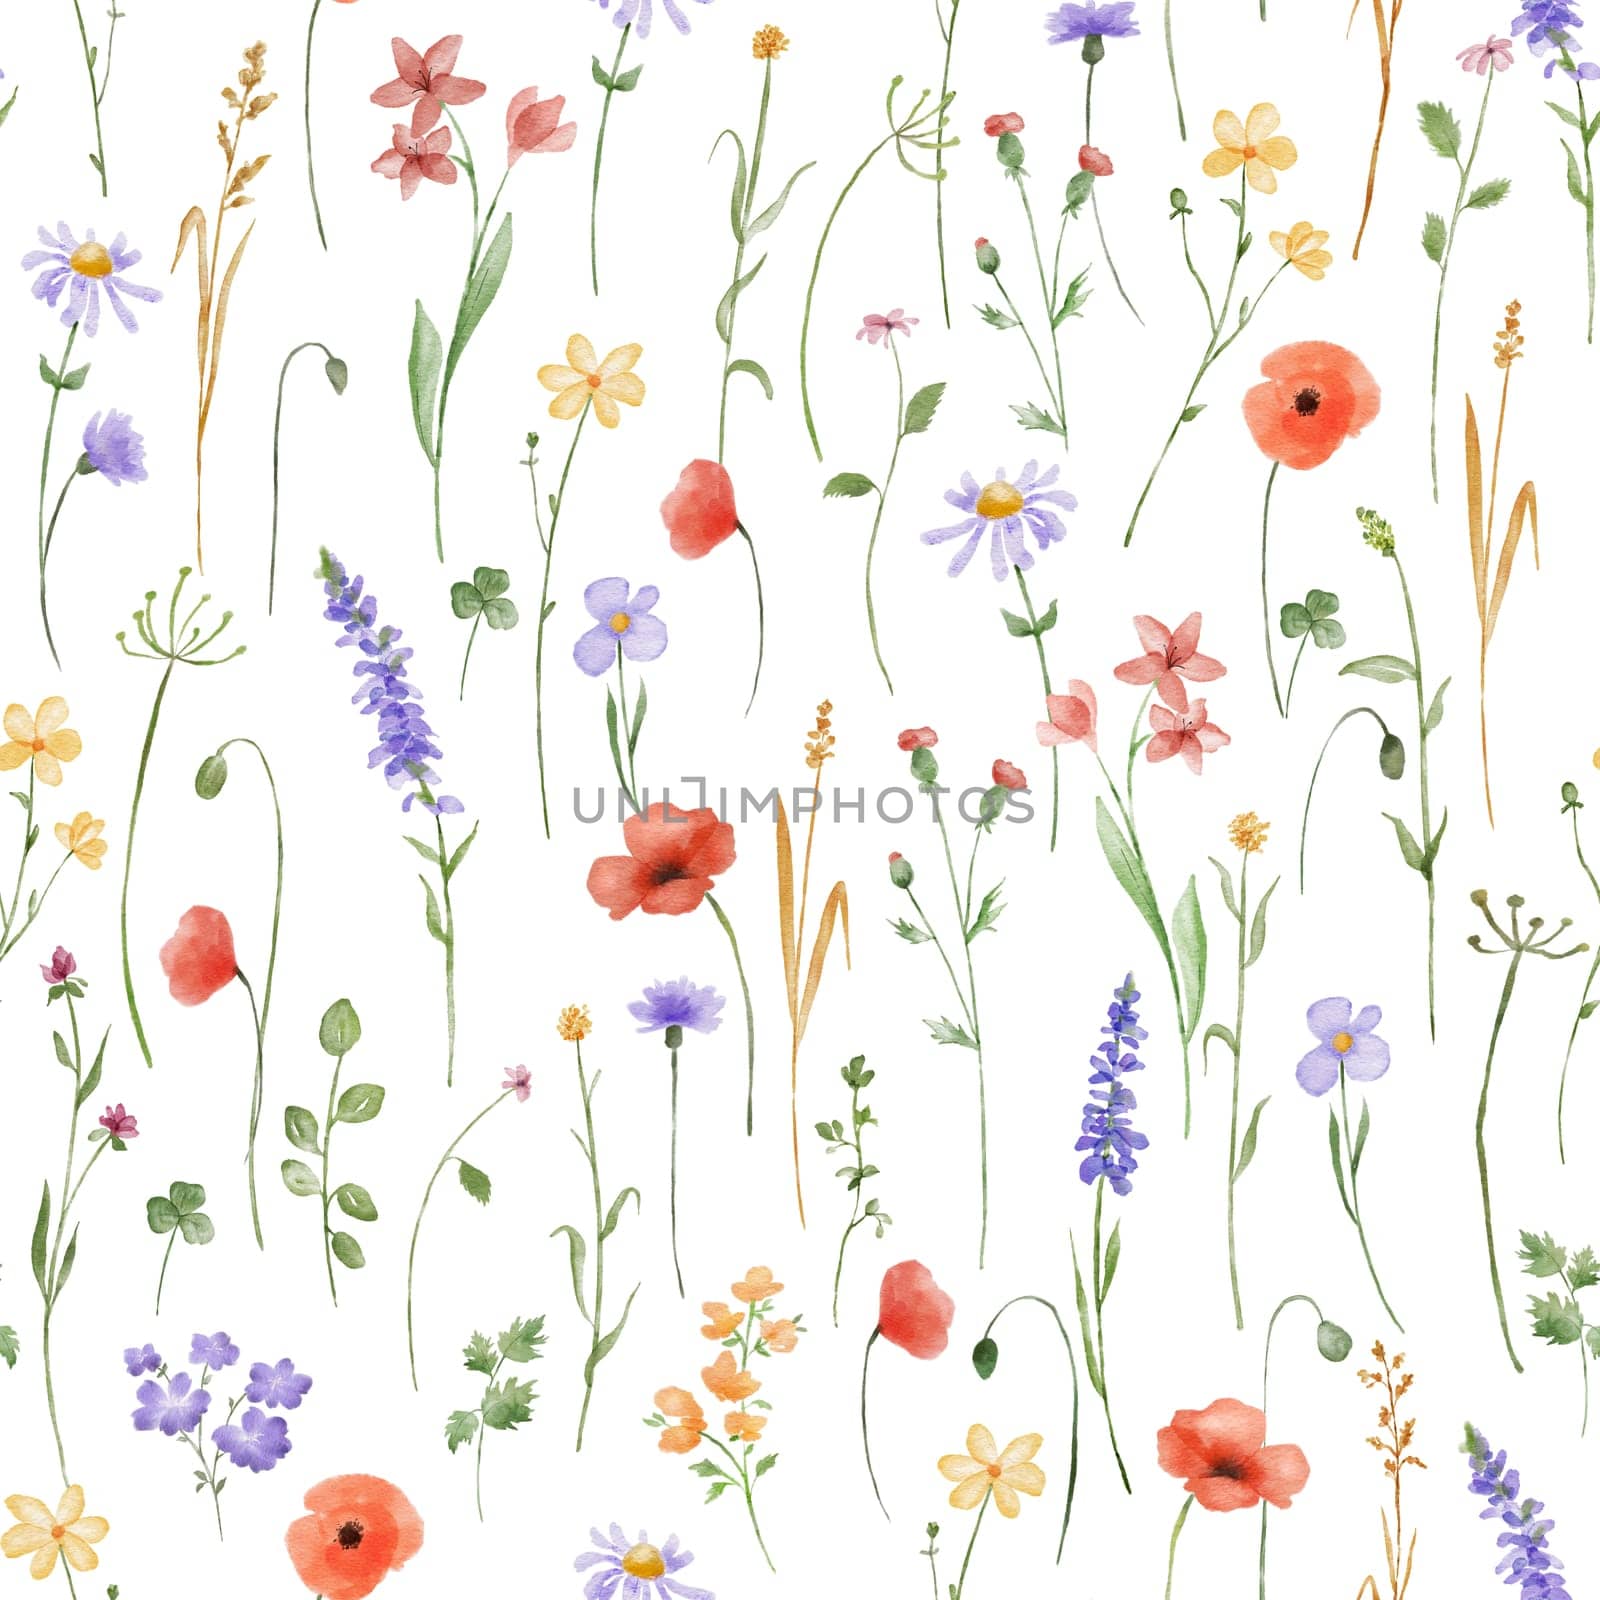 Watercolor floral seamless pattern with flowers poppy and lavender. Spring colorful decor with hand drawn wildflowers on white background